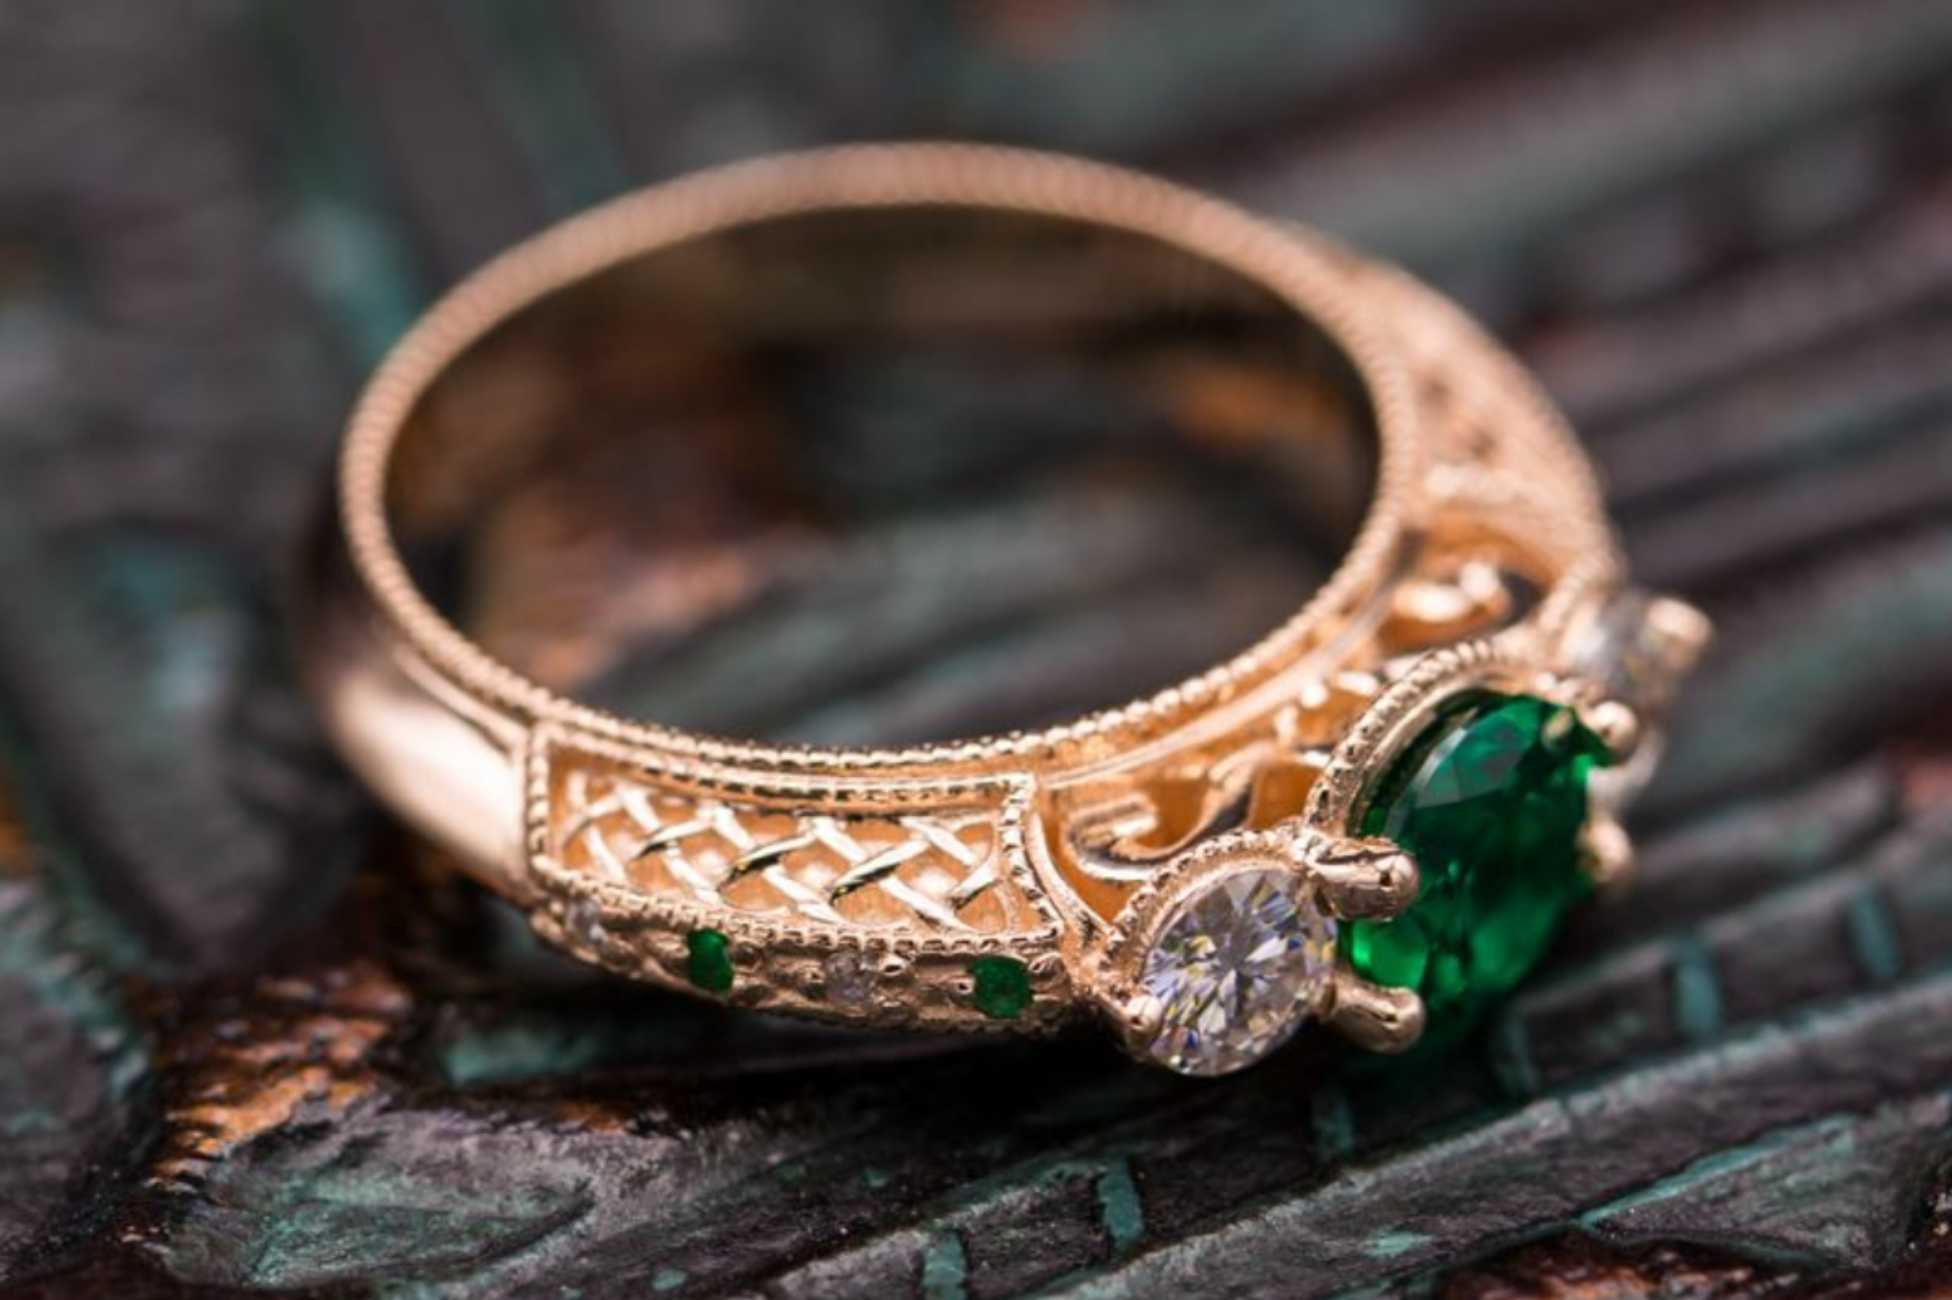 Vintage-inspired rose gold ring with three stone emerald and moissanite setting